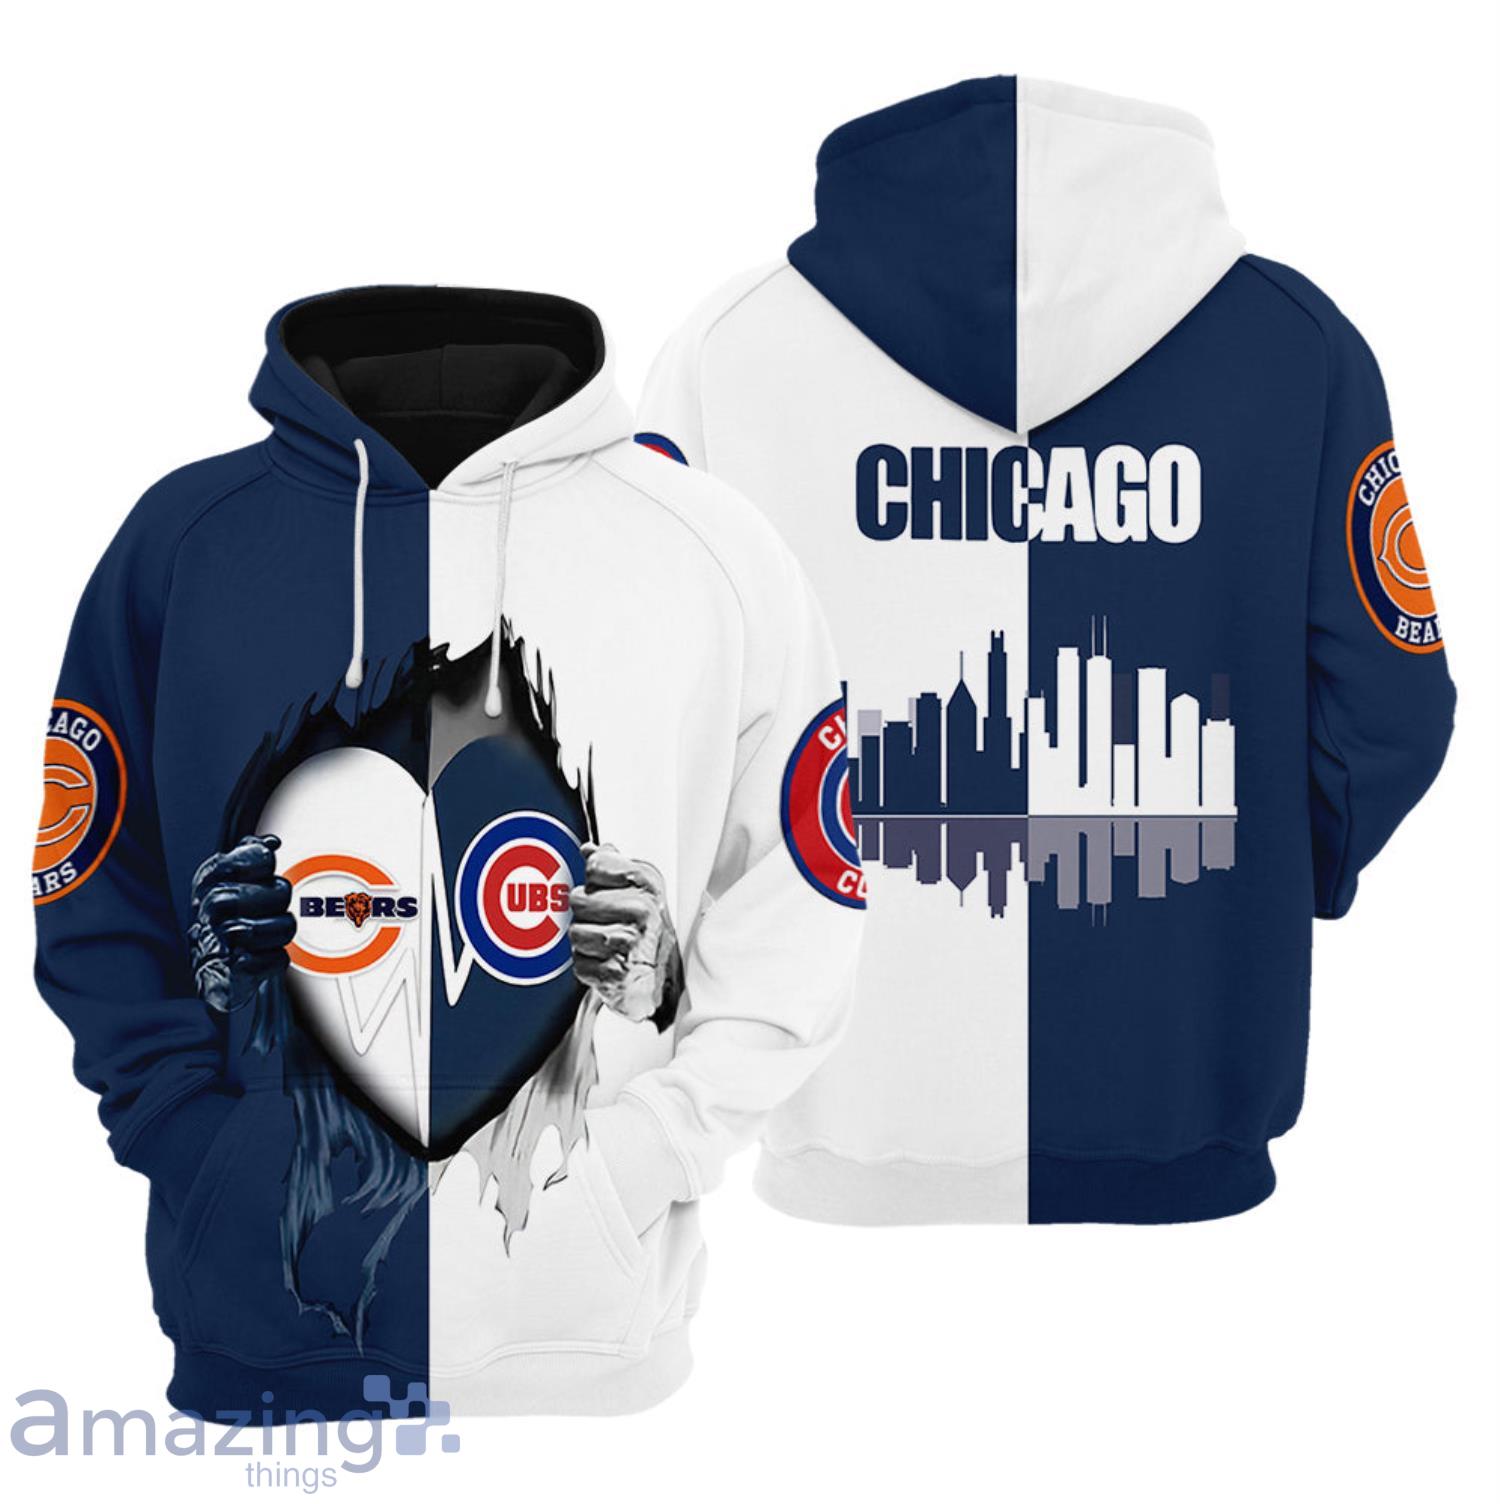 Chicago Bears And Chicago Cubs Heartbeat Love Ripped Team Logo For